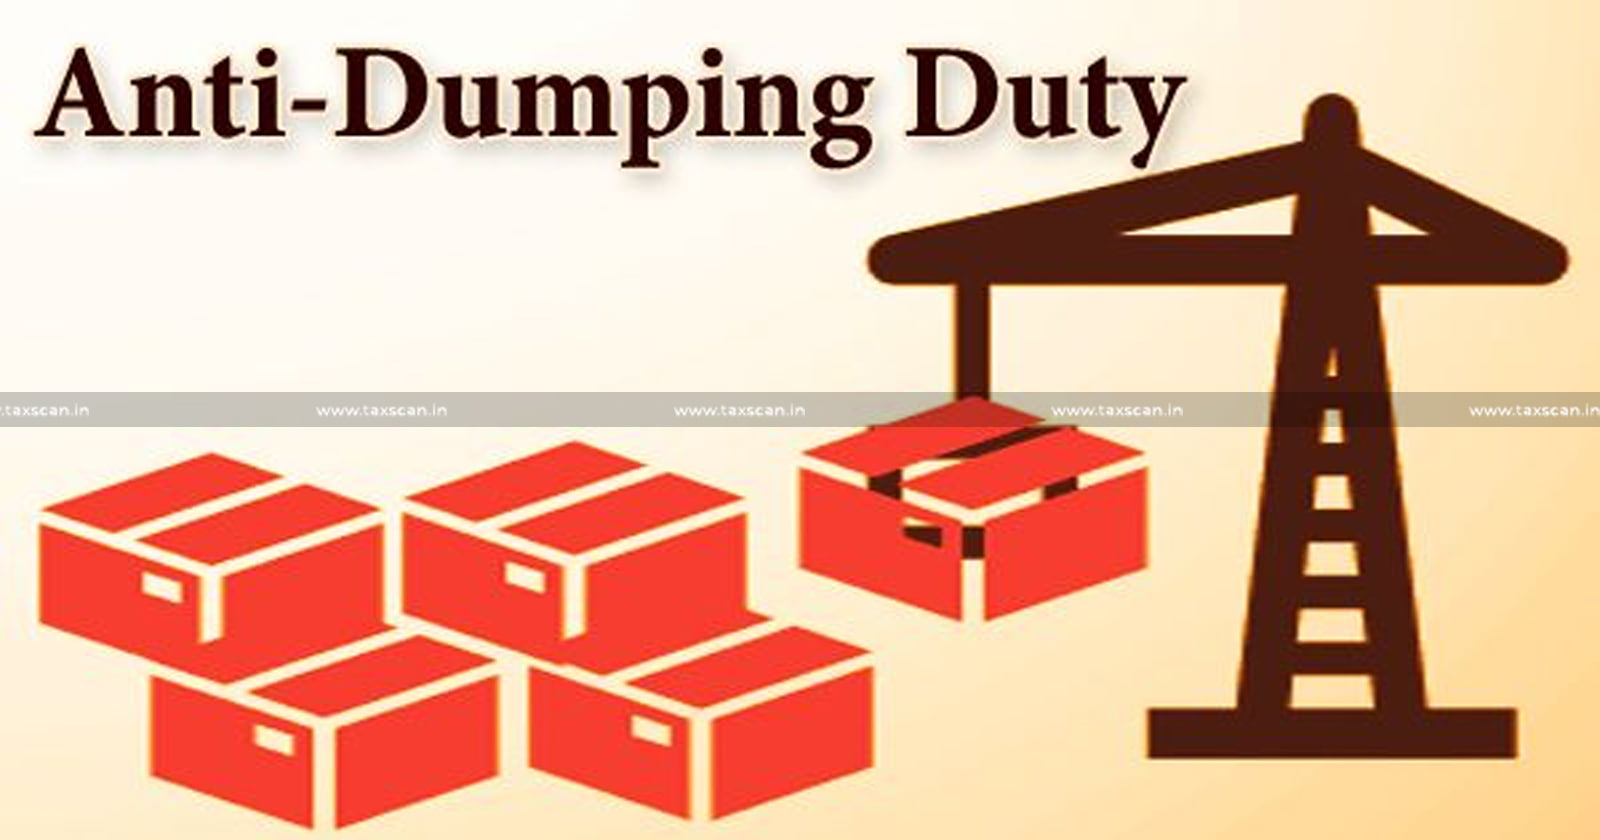 Central Government - anti-dumping duty - Designated Authority - CESTAT - Customs - Excise - Service Tax - taxscan